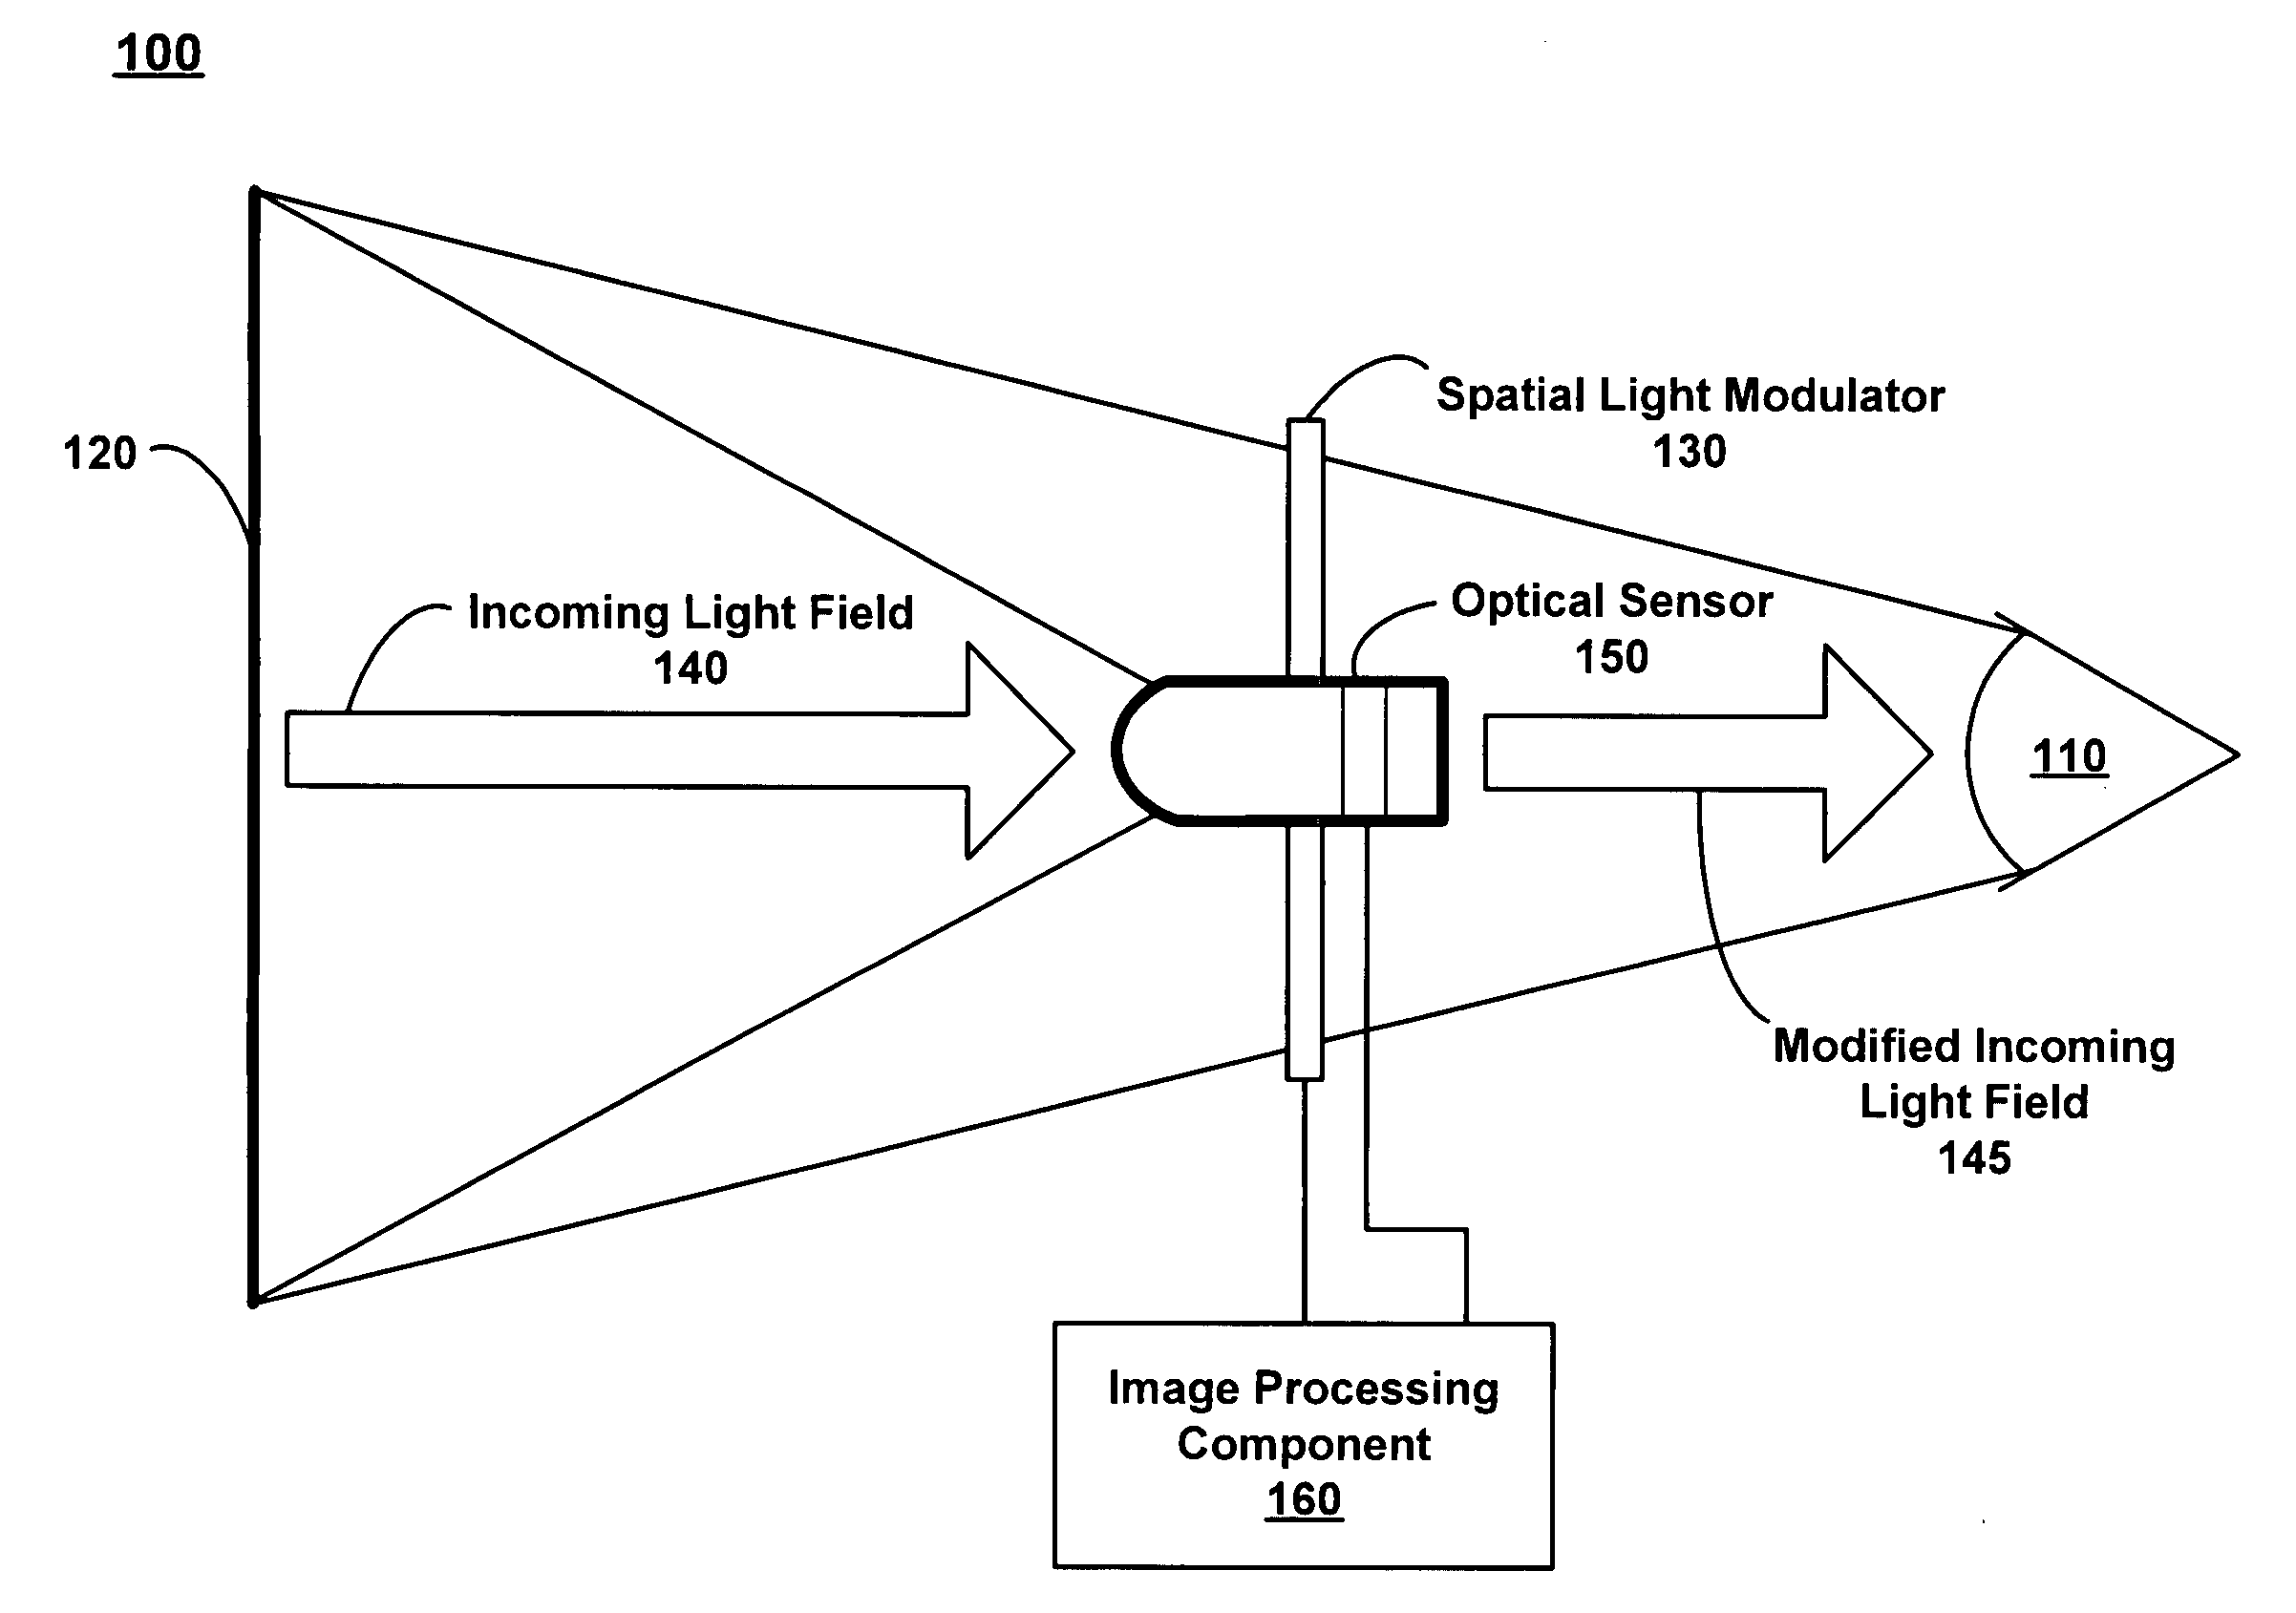 Image processing of an incoming light field using a spatial light modulator